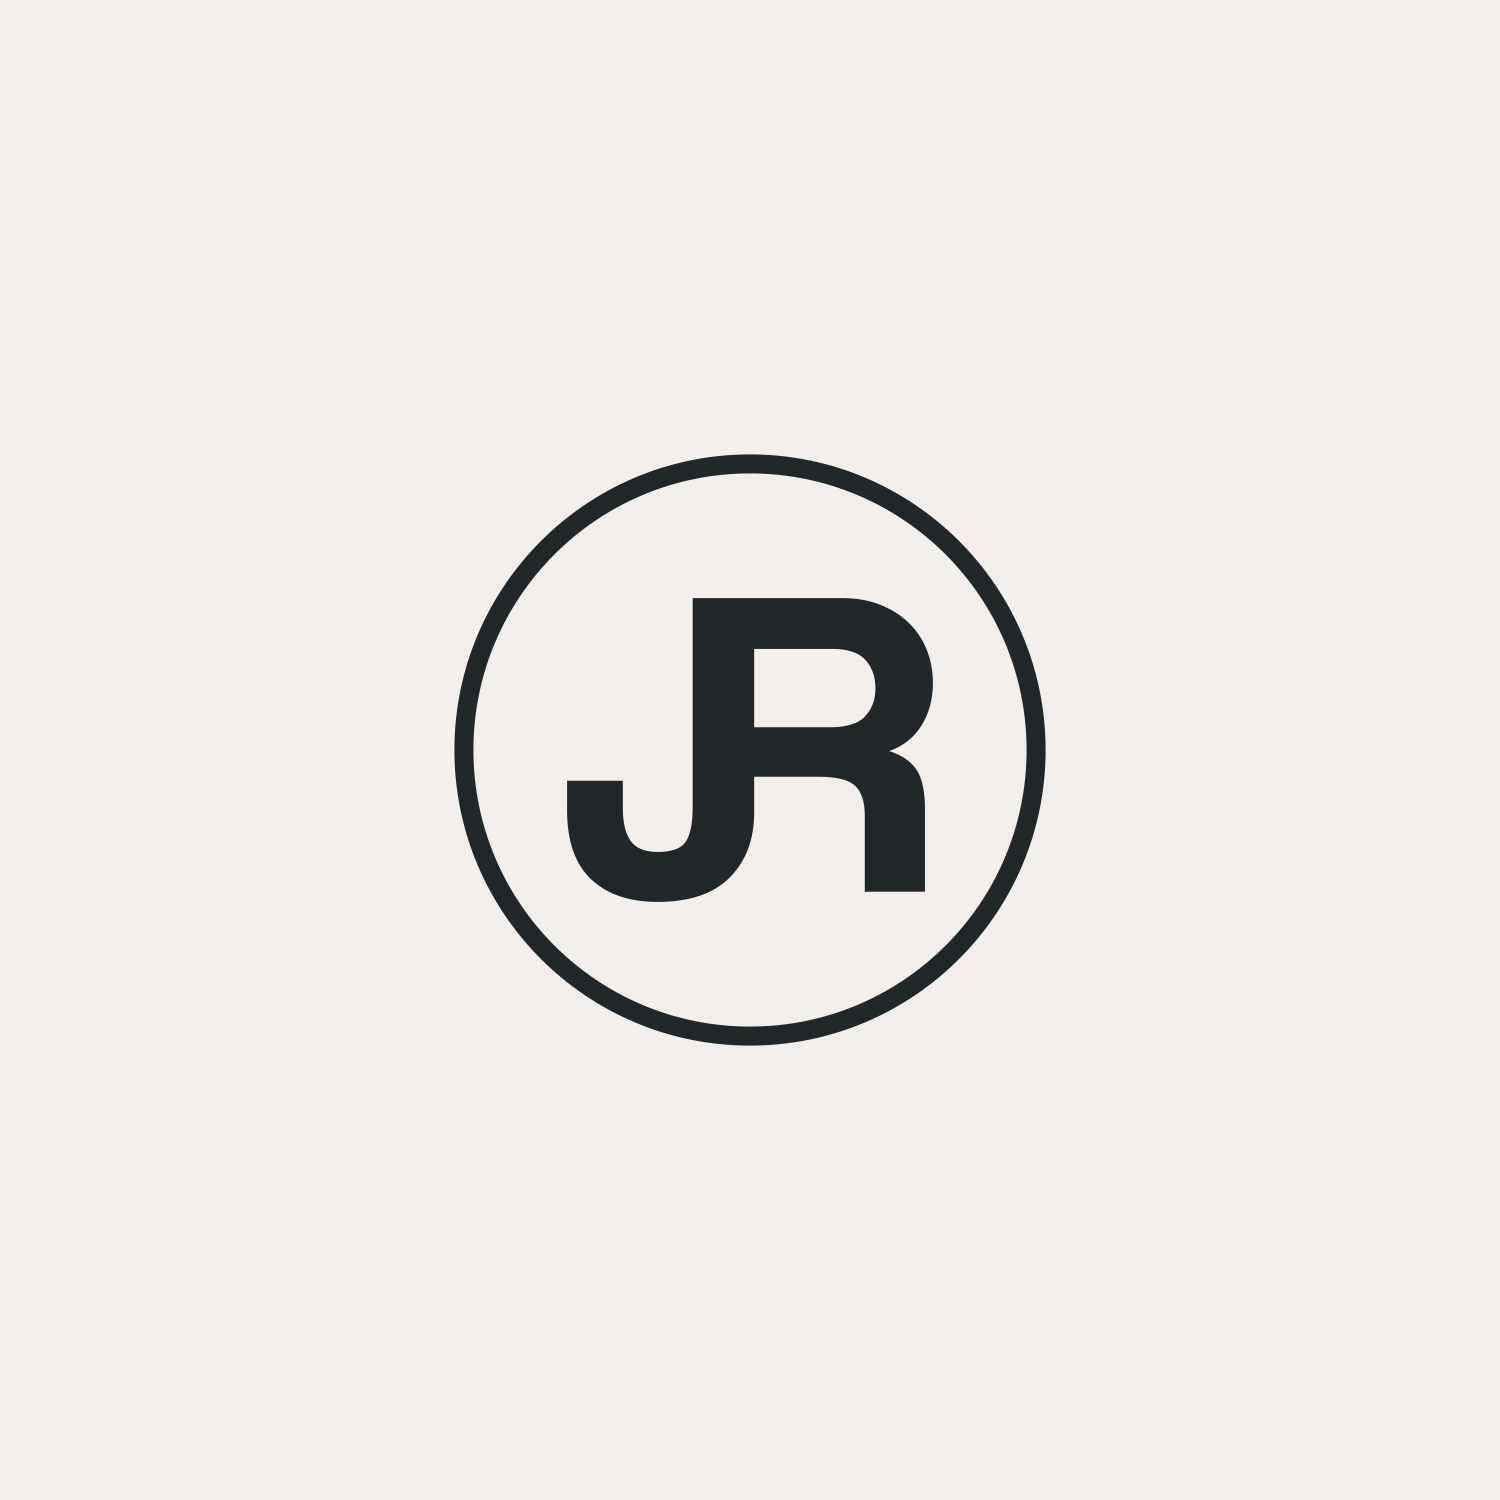 Andrea Logo - Modern, Conservative Logo Design for JR the initials of the name